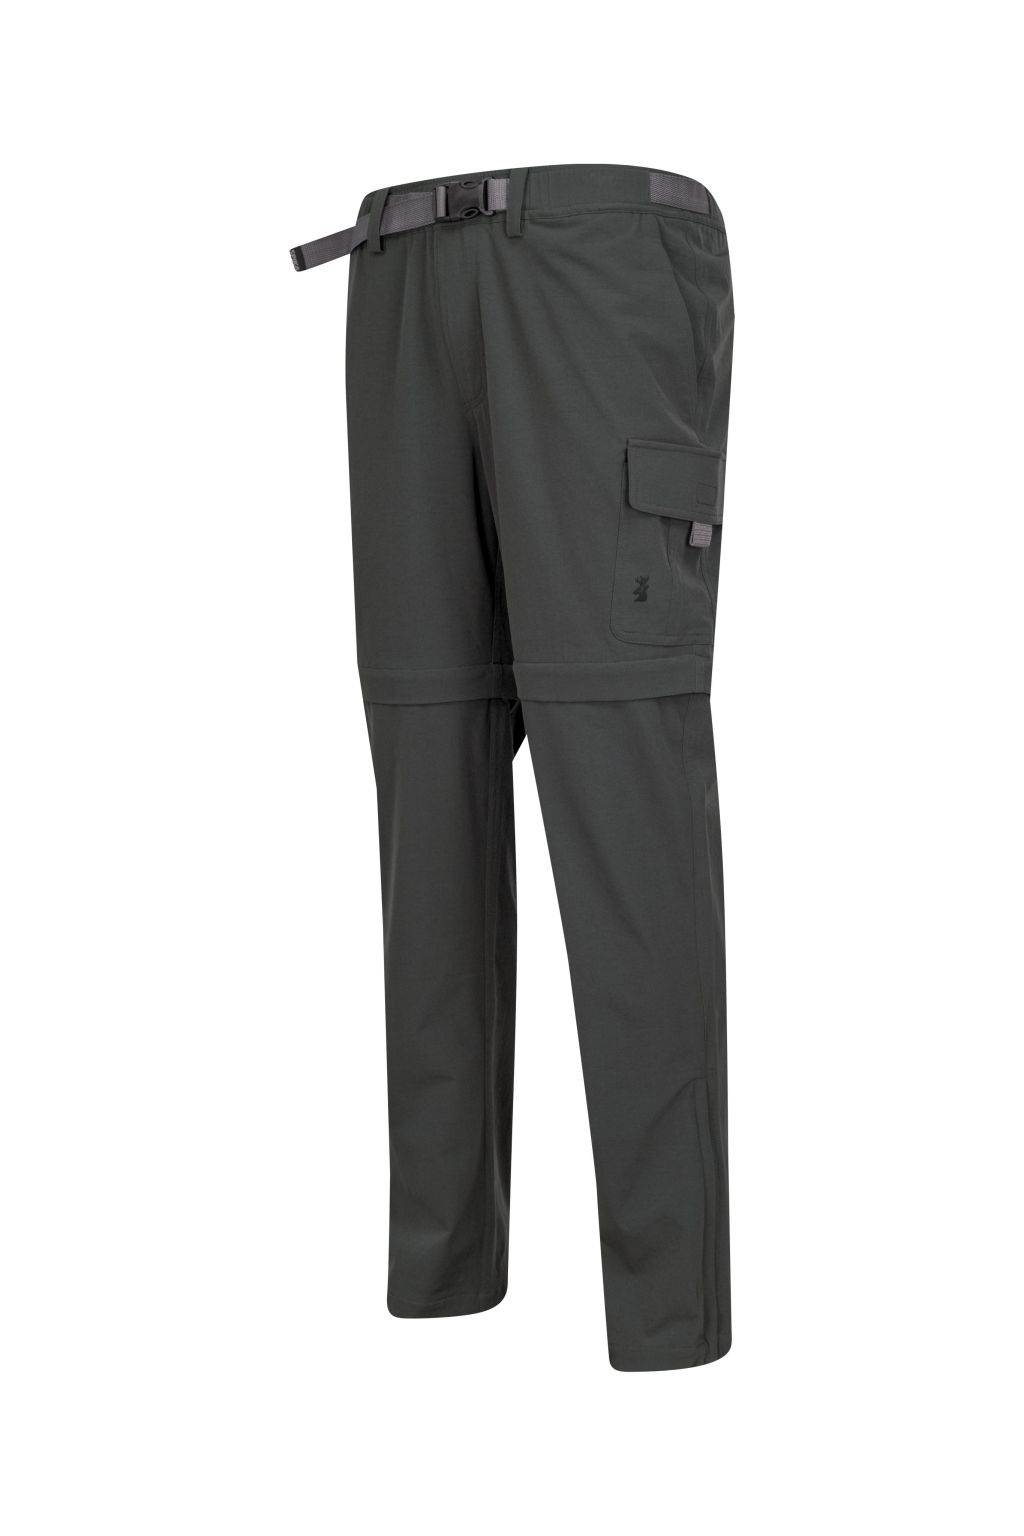 Spika GO Access Zip Off Pants - Ink - S - Mansfield Hunting & Fishing - Products to prepare for Corona Virus